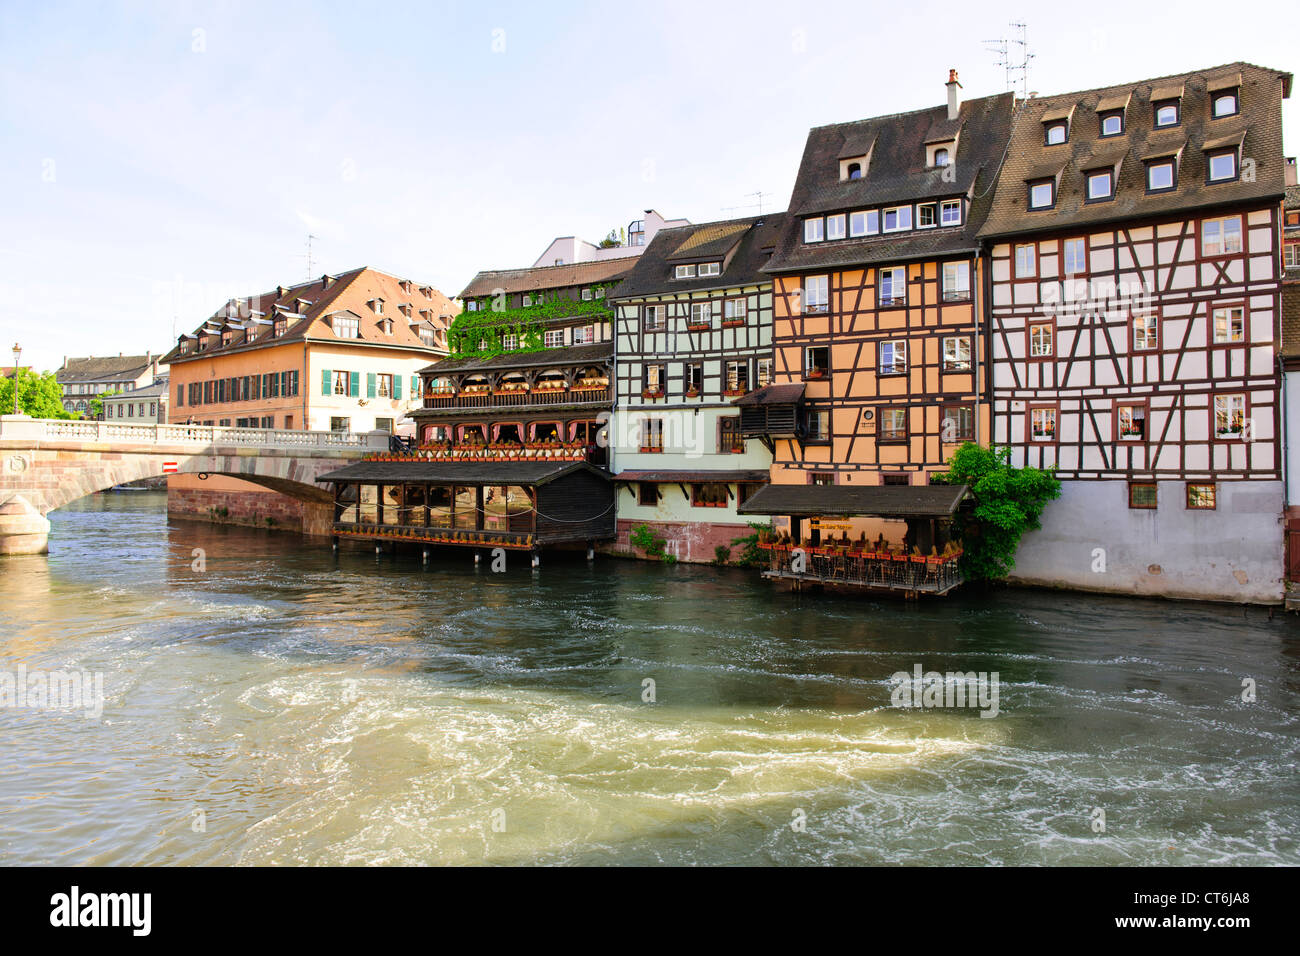 Timbered and Half Timbered mediaeval Houses,Quai Ch.Frey,Petit France,L'ill River,Sleuce Gates,Strasbourg,France Stock Photo